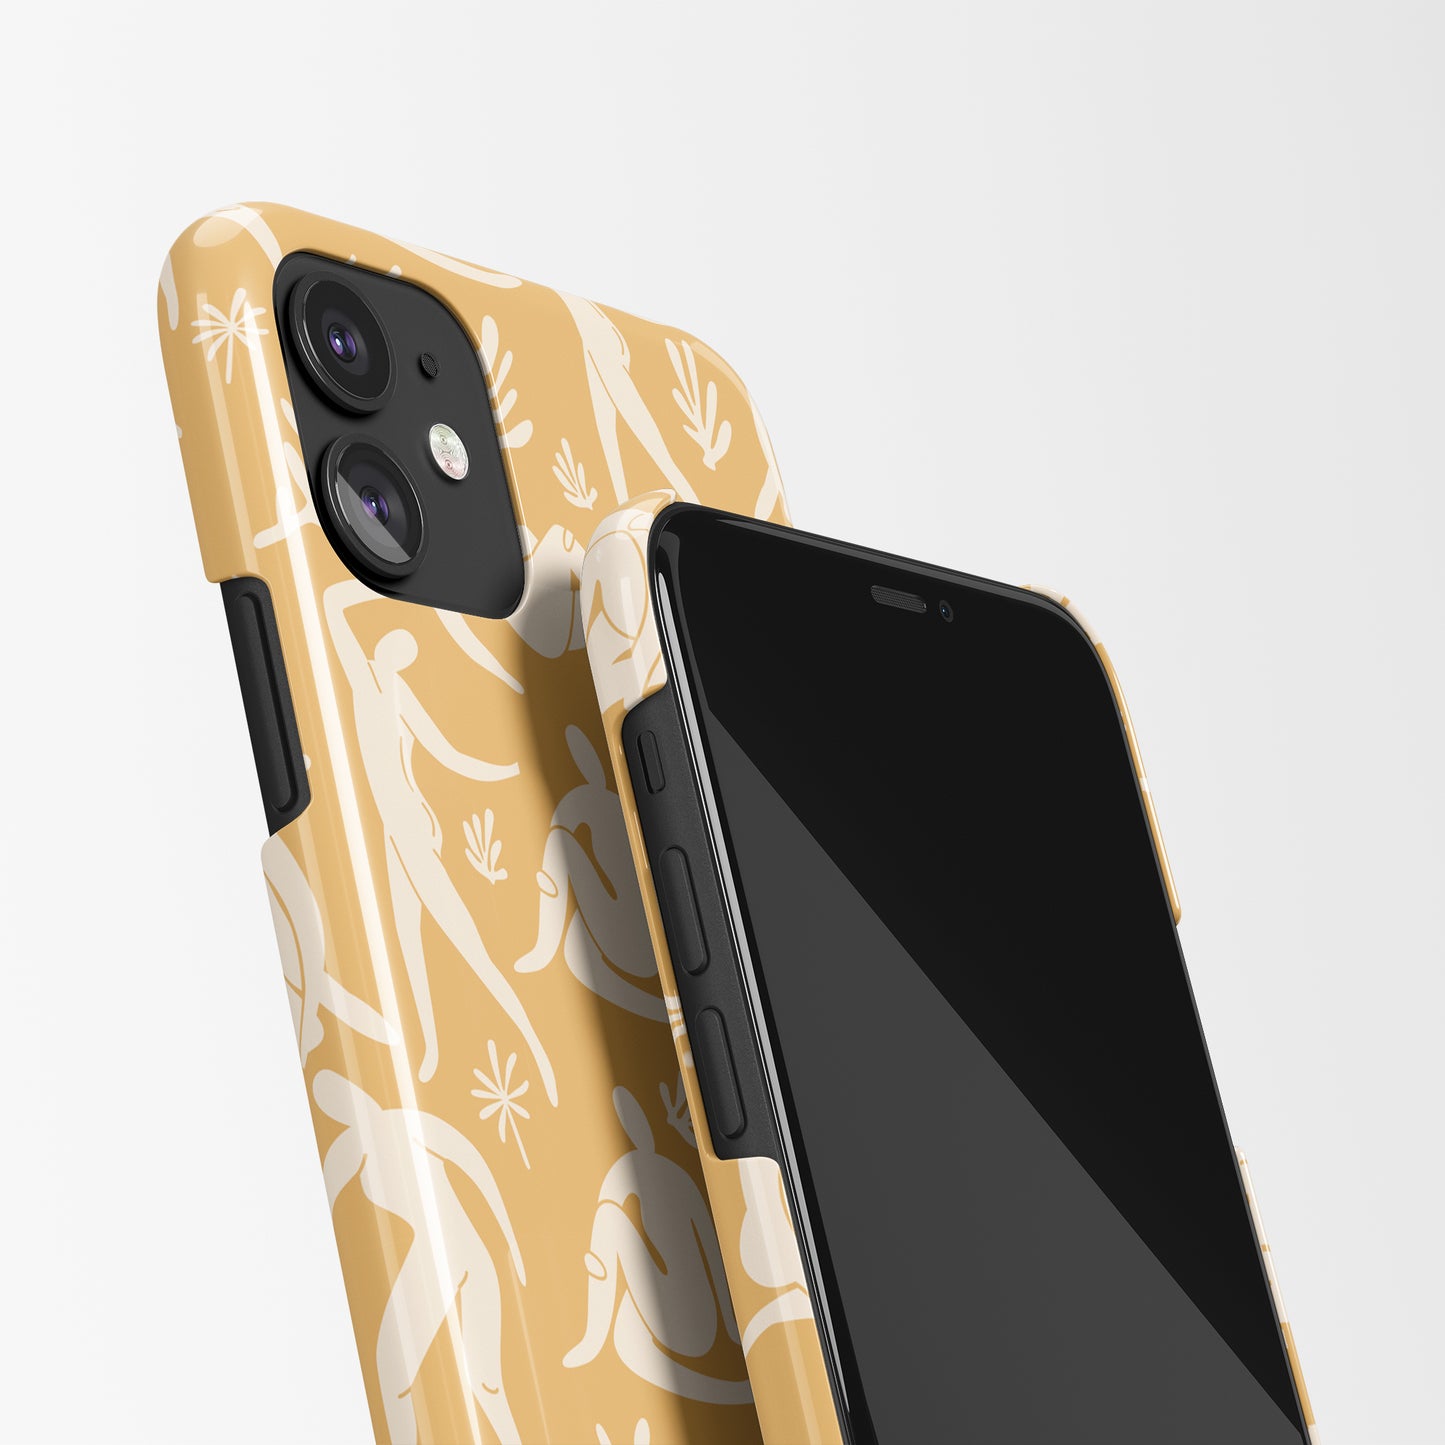 iPhone Case with Women Cutouts Print